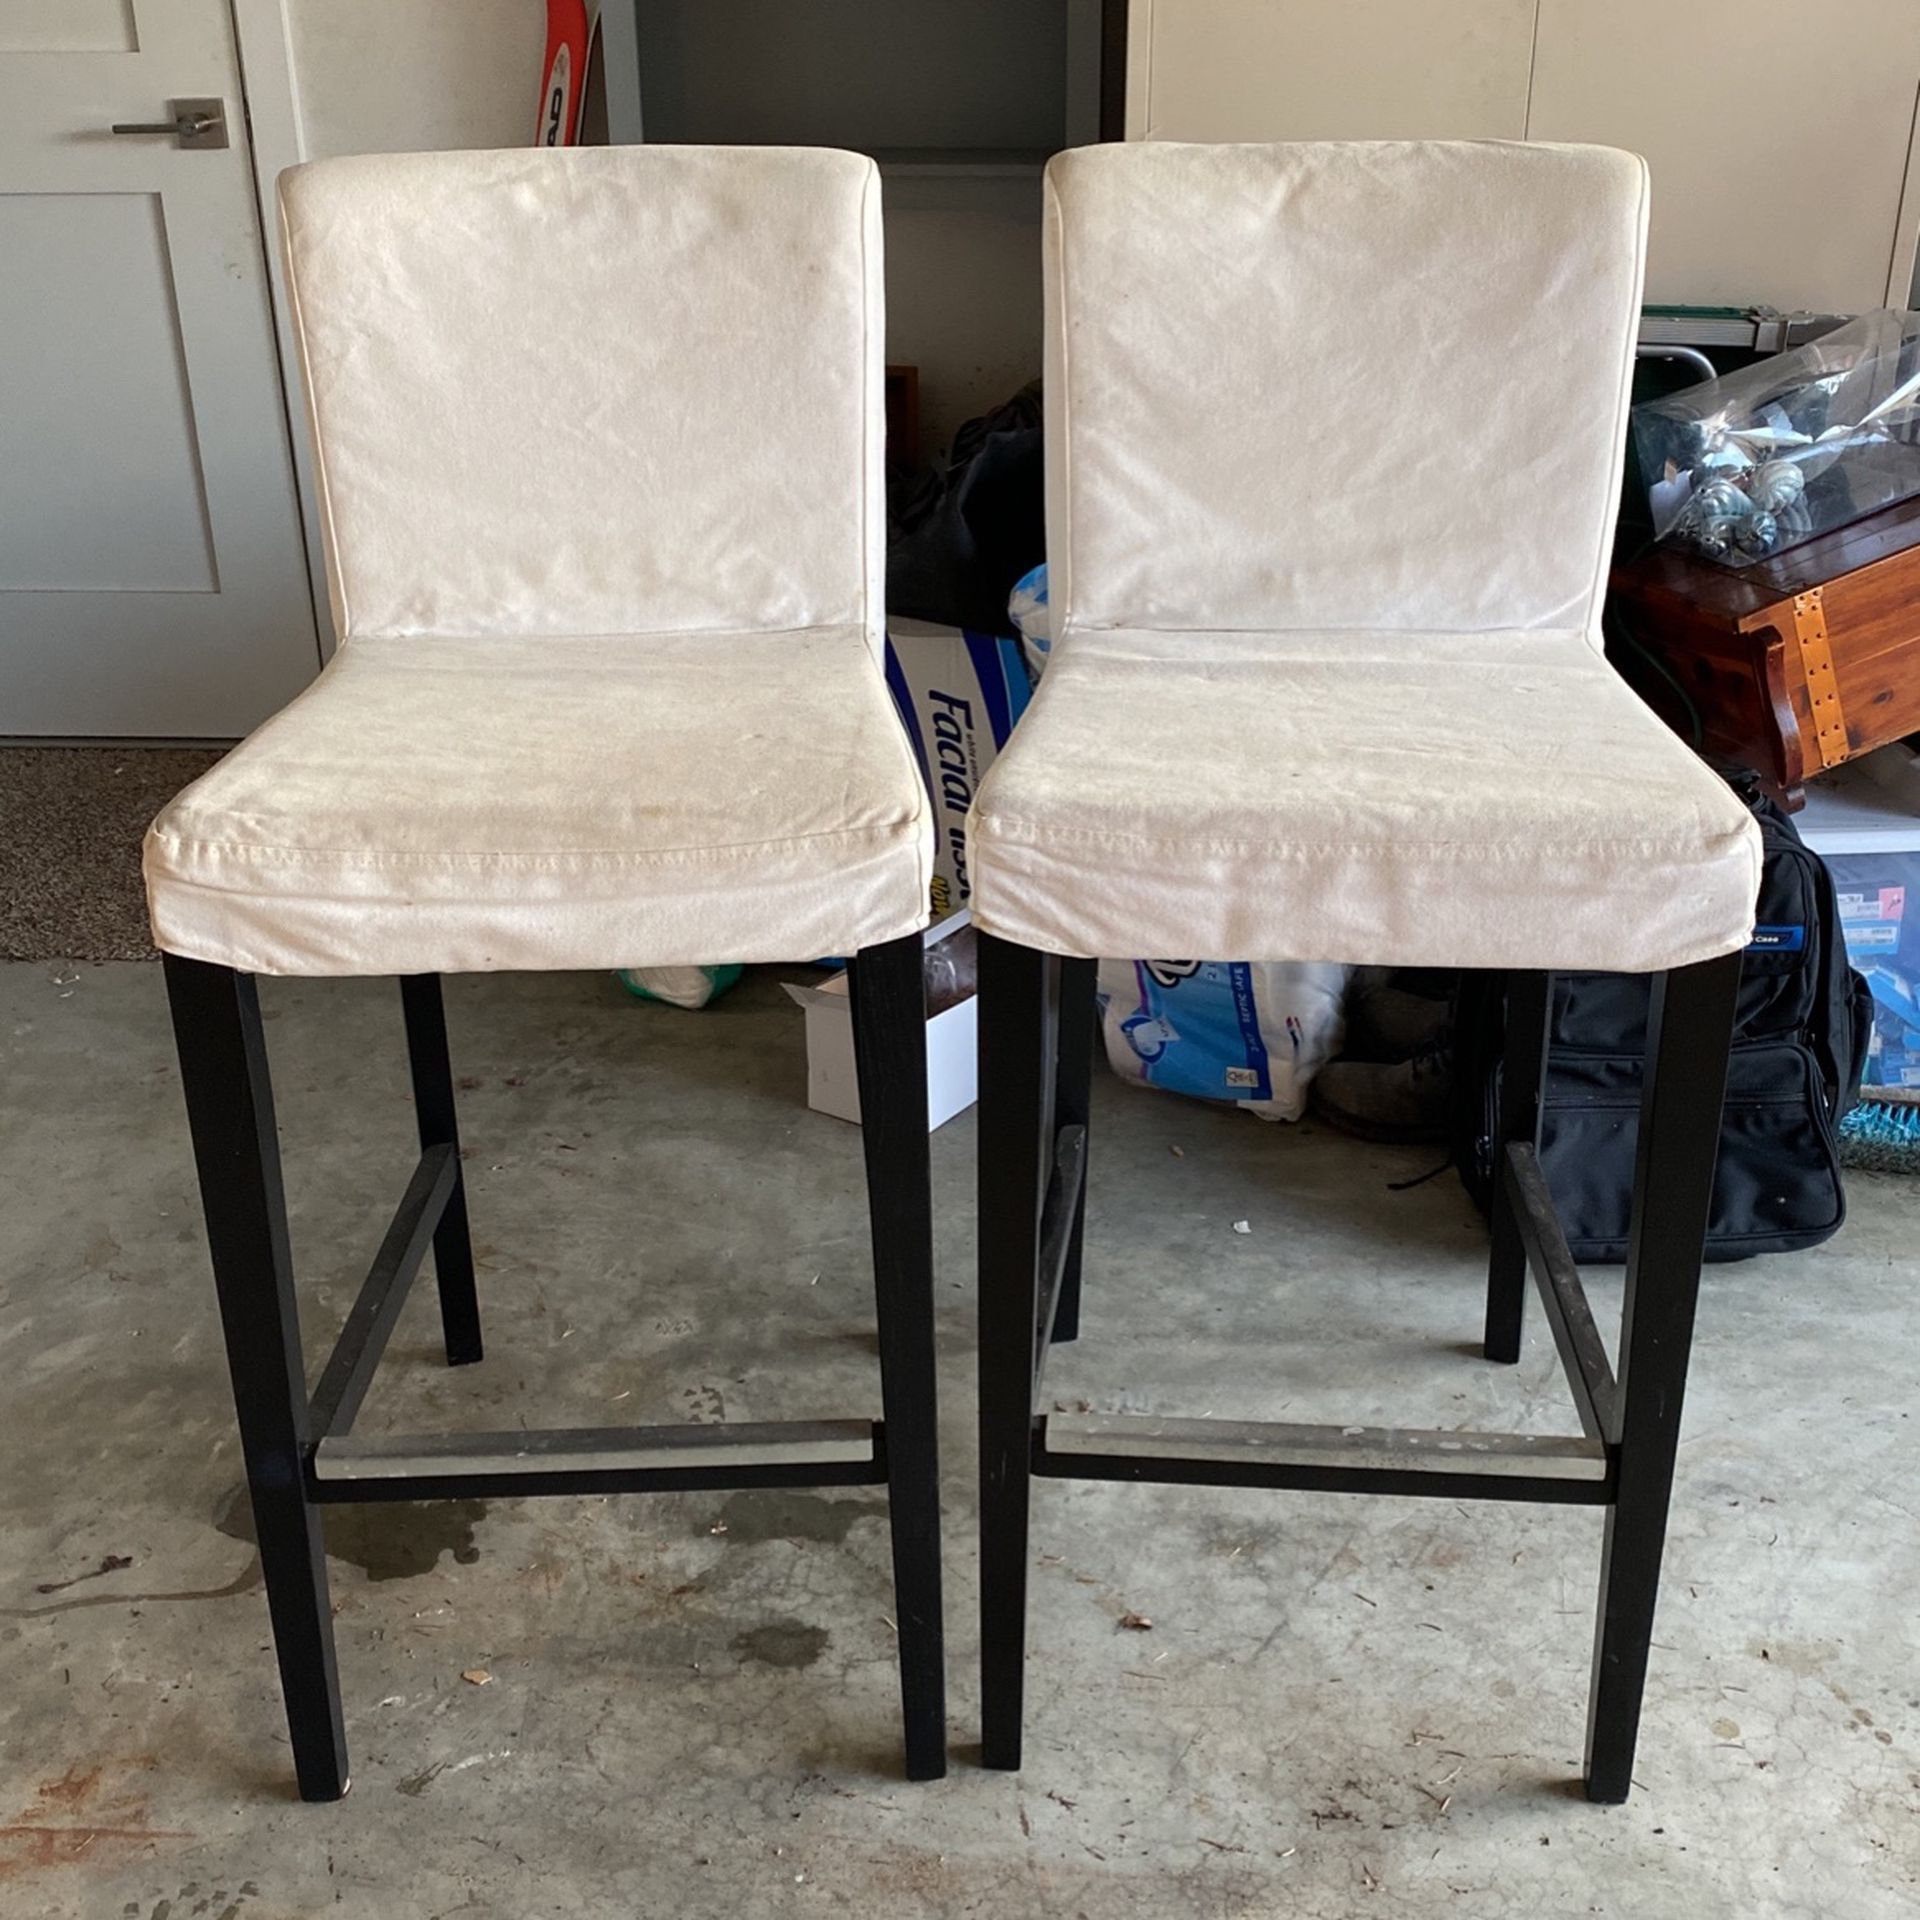 IKEA Bar Stools For Dining Table Or Breakfast Nook